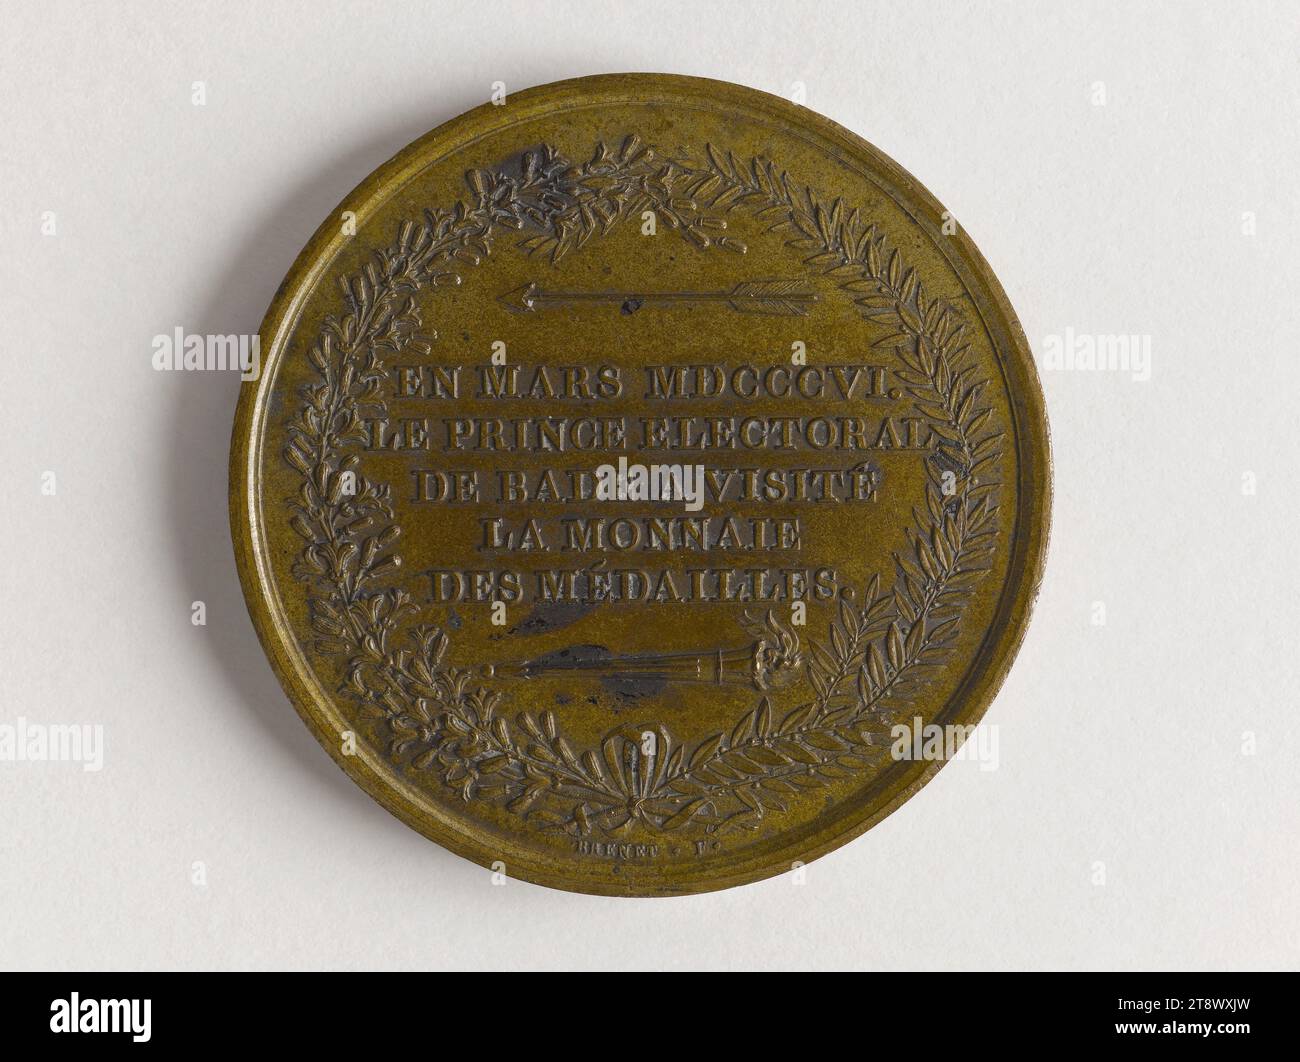 Visit of the Prince of Baden to the Mint of Medals, March 1806., Brenet, Nicolas, Engraver in medals, Array, Numismatics, Medal, Dimensions - Work: Diameter: 4.1 cm, Weight (type dimension): 35.36 g Stock Photo